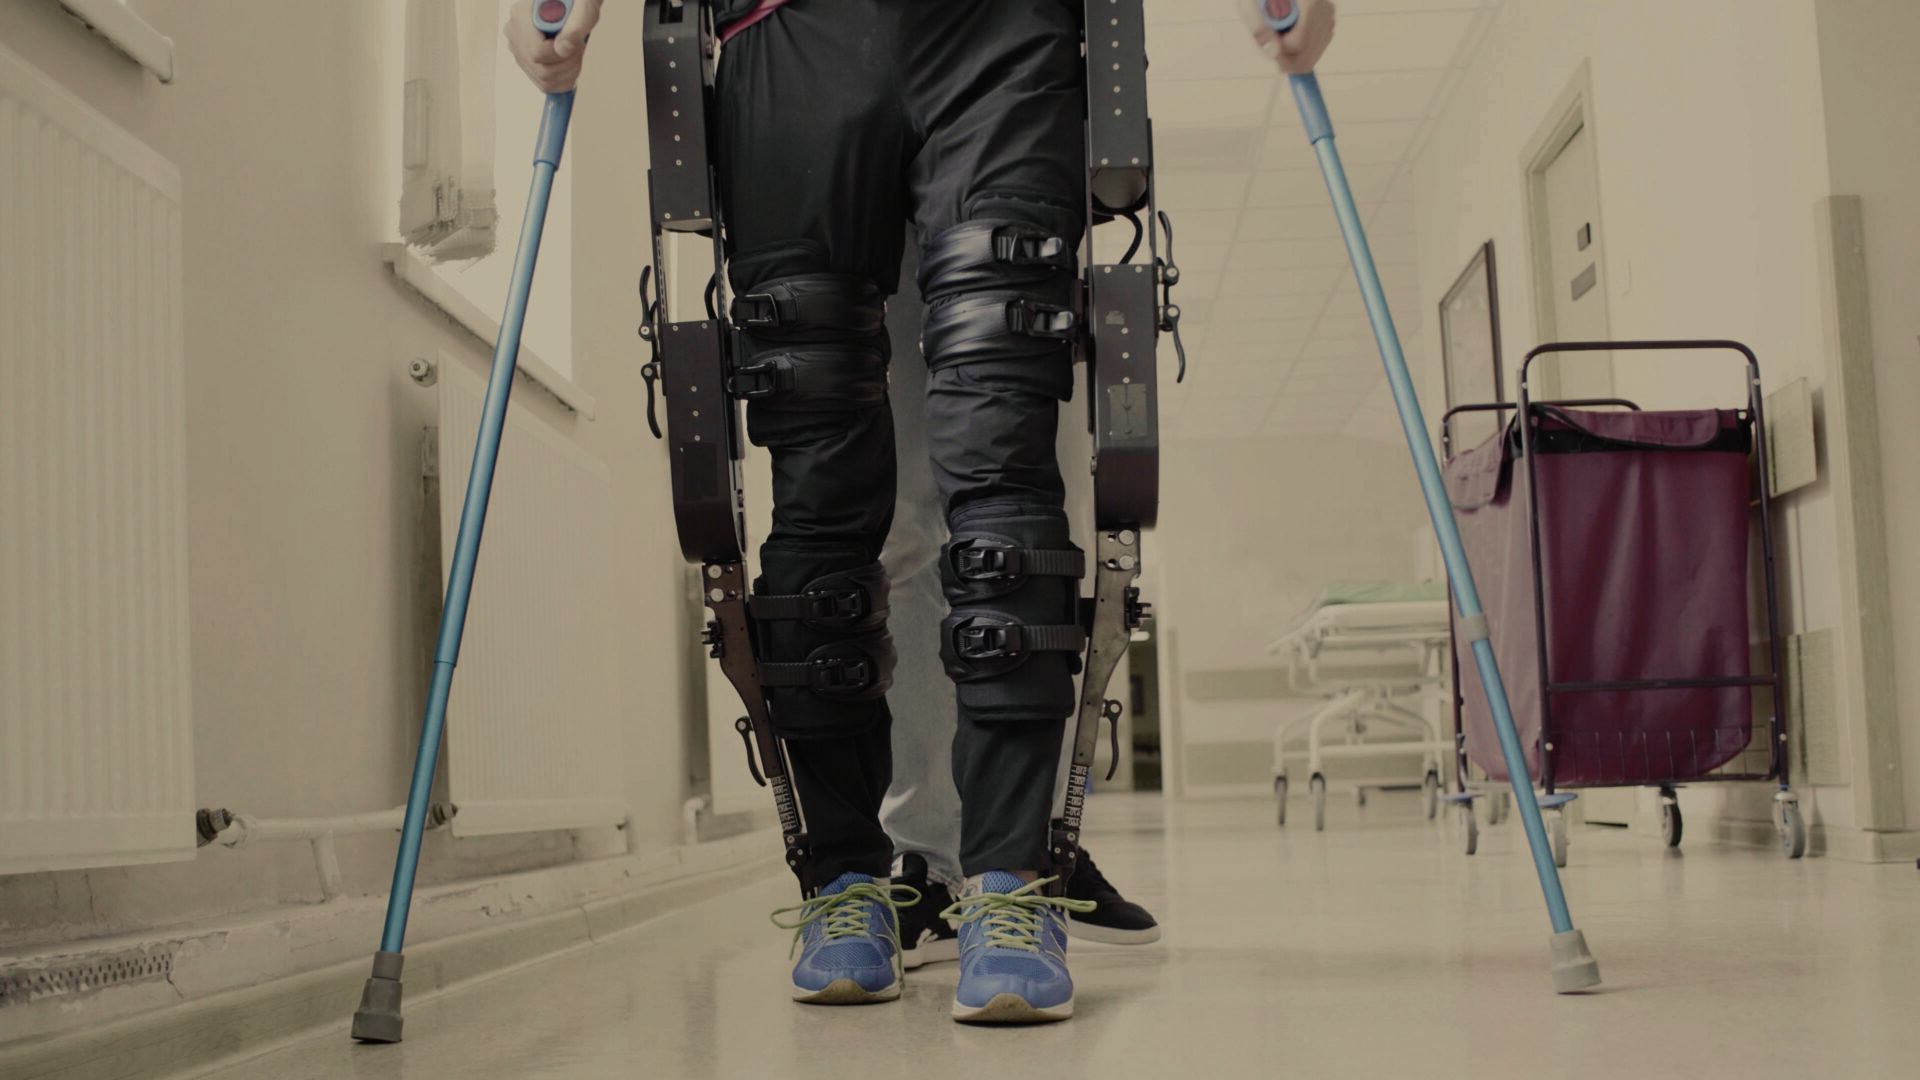 A person wearing a prosthetic leg and crutches is walking down a hallway.